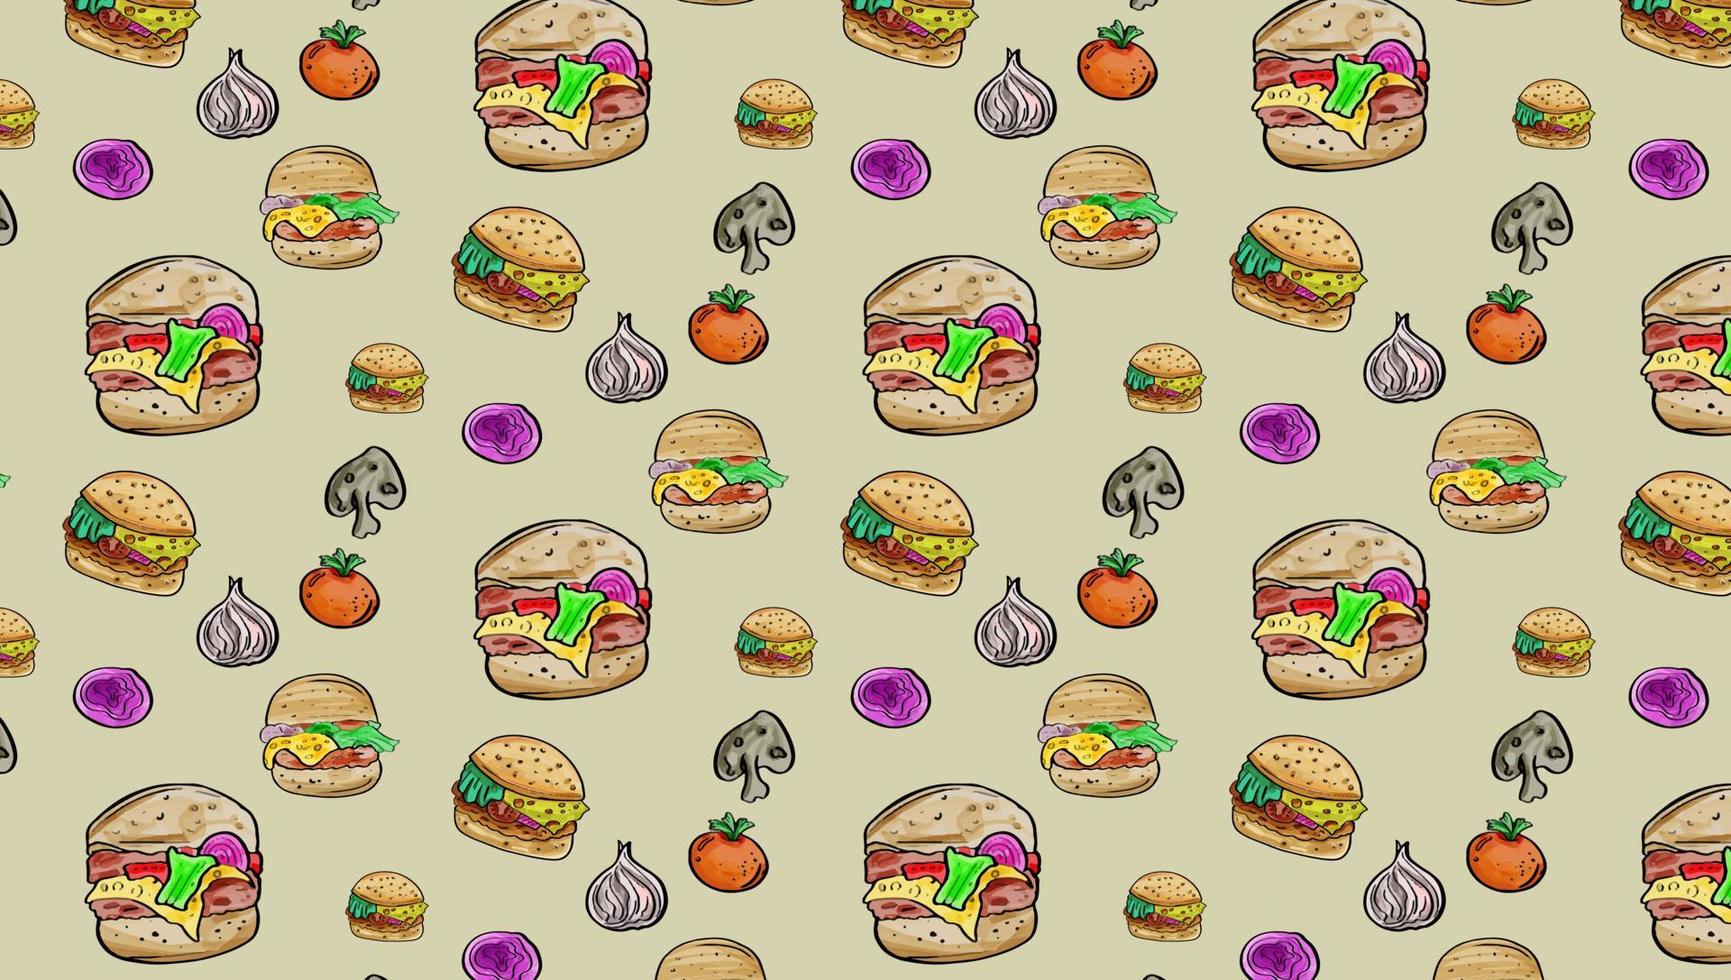 Pattern Background junk food Food  Isometric Seamless Template flat design for decorative or gift wrapping paper, vector